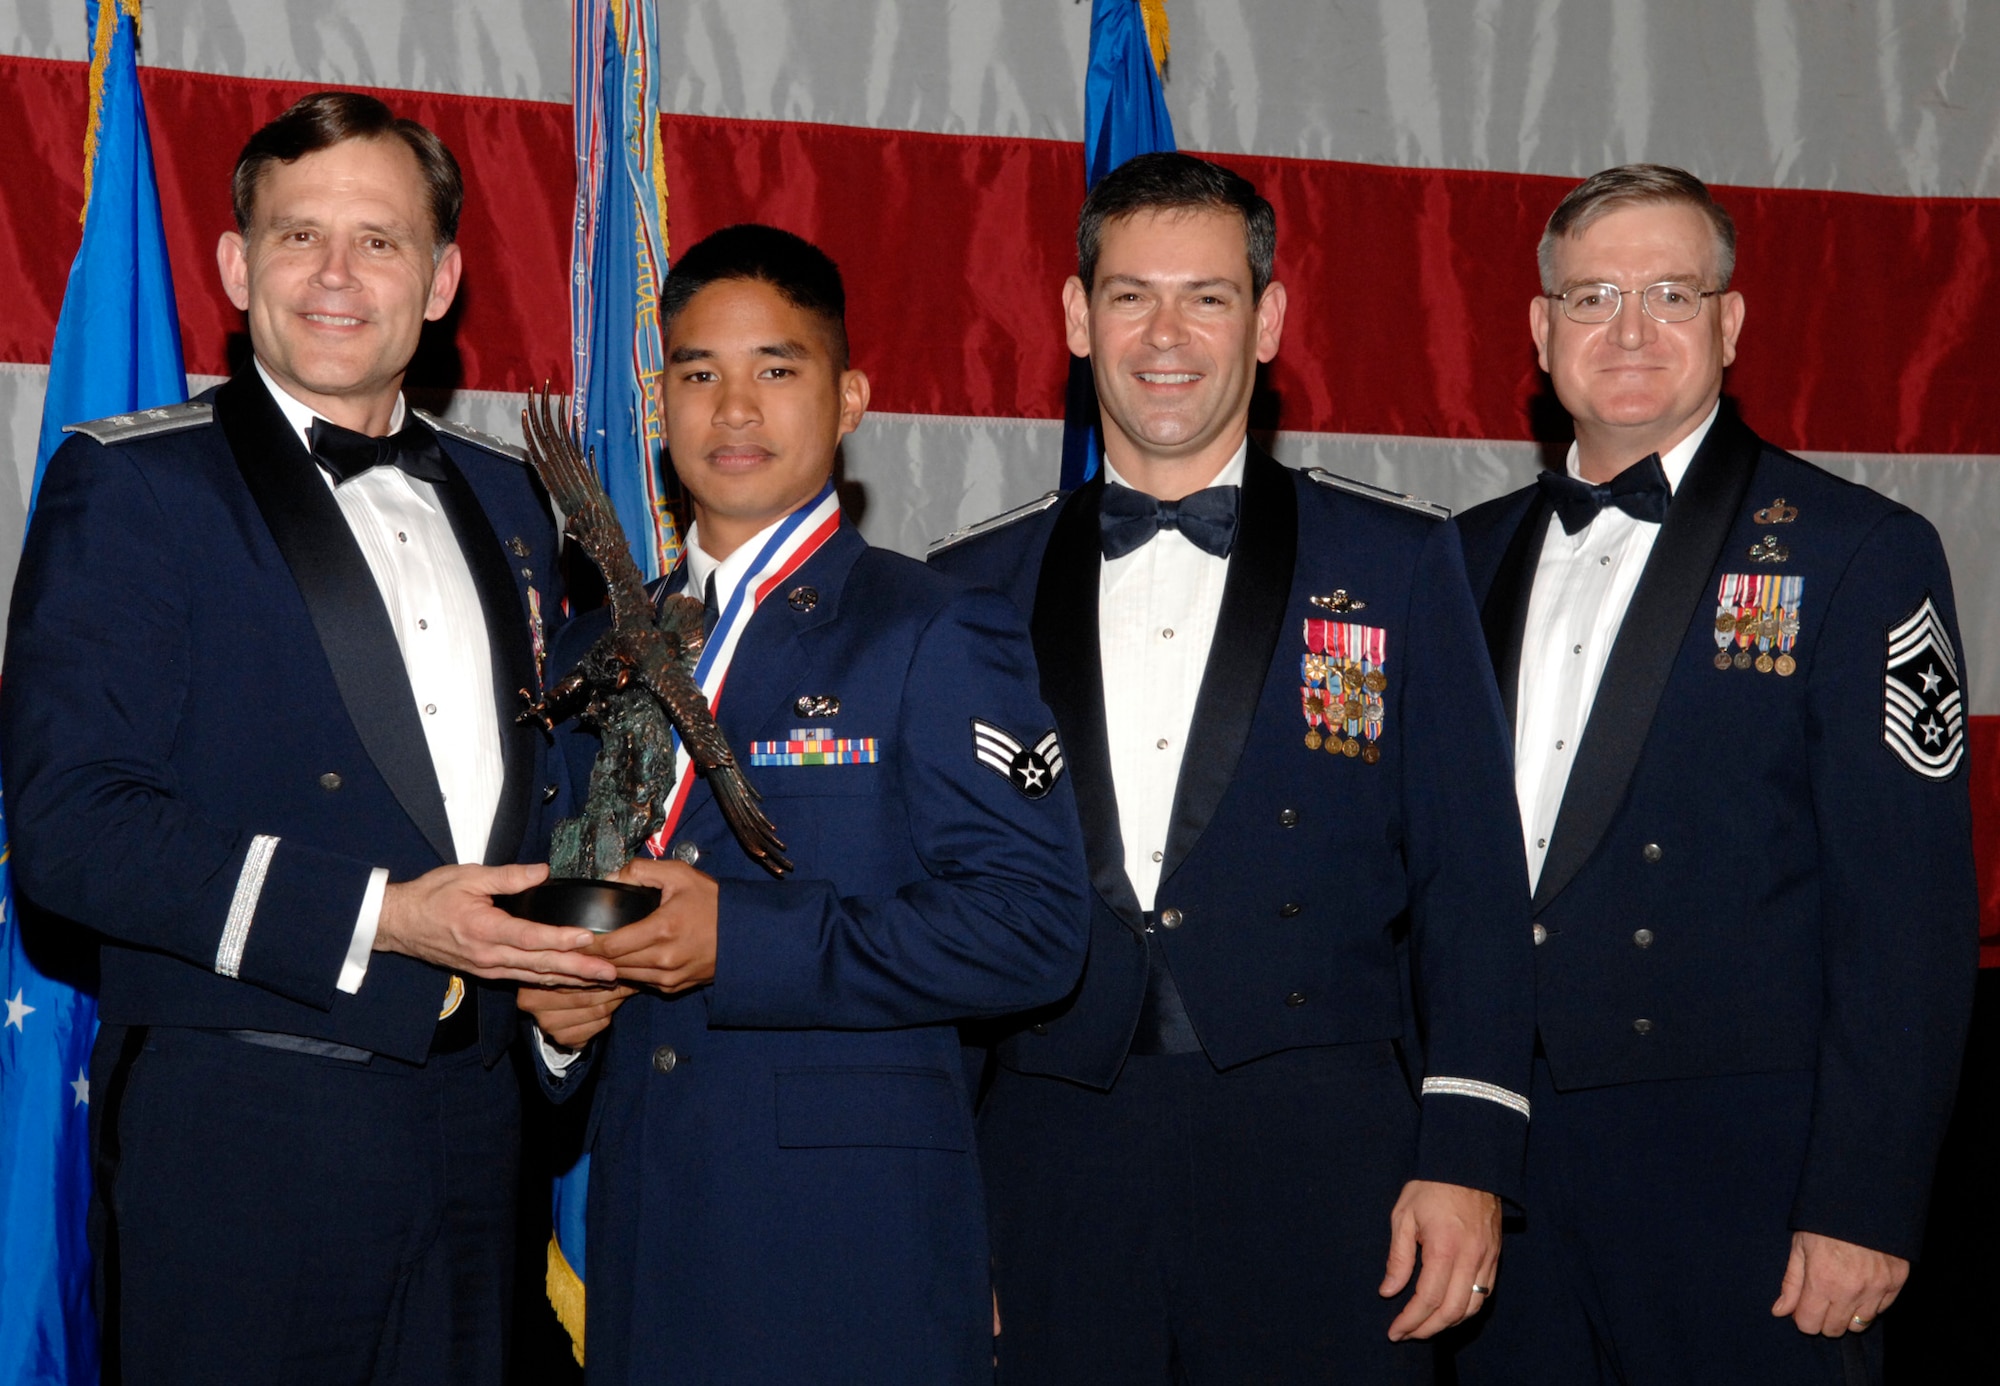 Senior Airman Allan Robillos, 16th Electronic Warfare Squadron, won the 53d Wing Airman of the Year Award  during the annual awards banquet Jan. 31 at the Emerald Coast Conference Center.  The night’s guest speaker and former 53d commander, Maj. Gen. (Retired) Jack Catton (left) presented the awards.  Col. Ken Wilsbach, 53d Wing commander, and Chief Master Sgt. Randy Salefske, 53d Wing command chief, also stand with the winner.  U.S. Air Force photo.